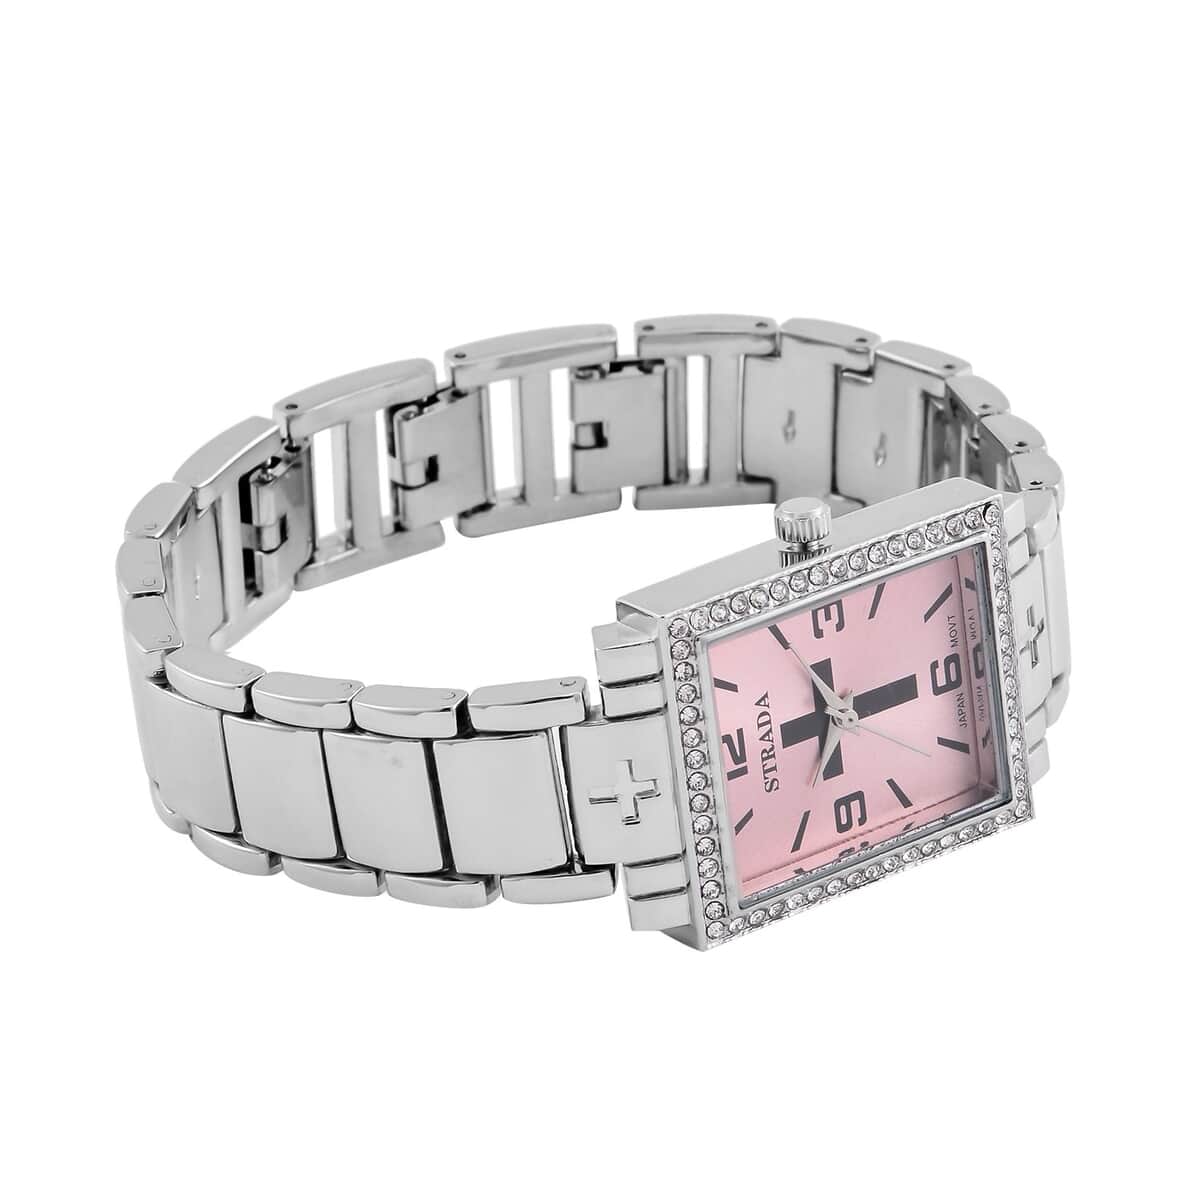 Strada White Austrian Crystal Japanese Movement Cross Pattern & Pink Dial Watch with Silvertone Strap (26.16-30.48 mm) (6.75-8.25 Inches) image number 5